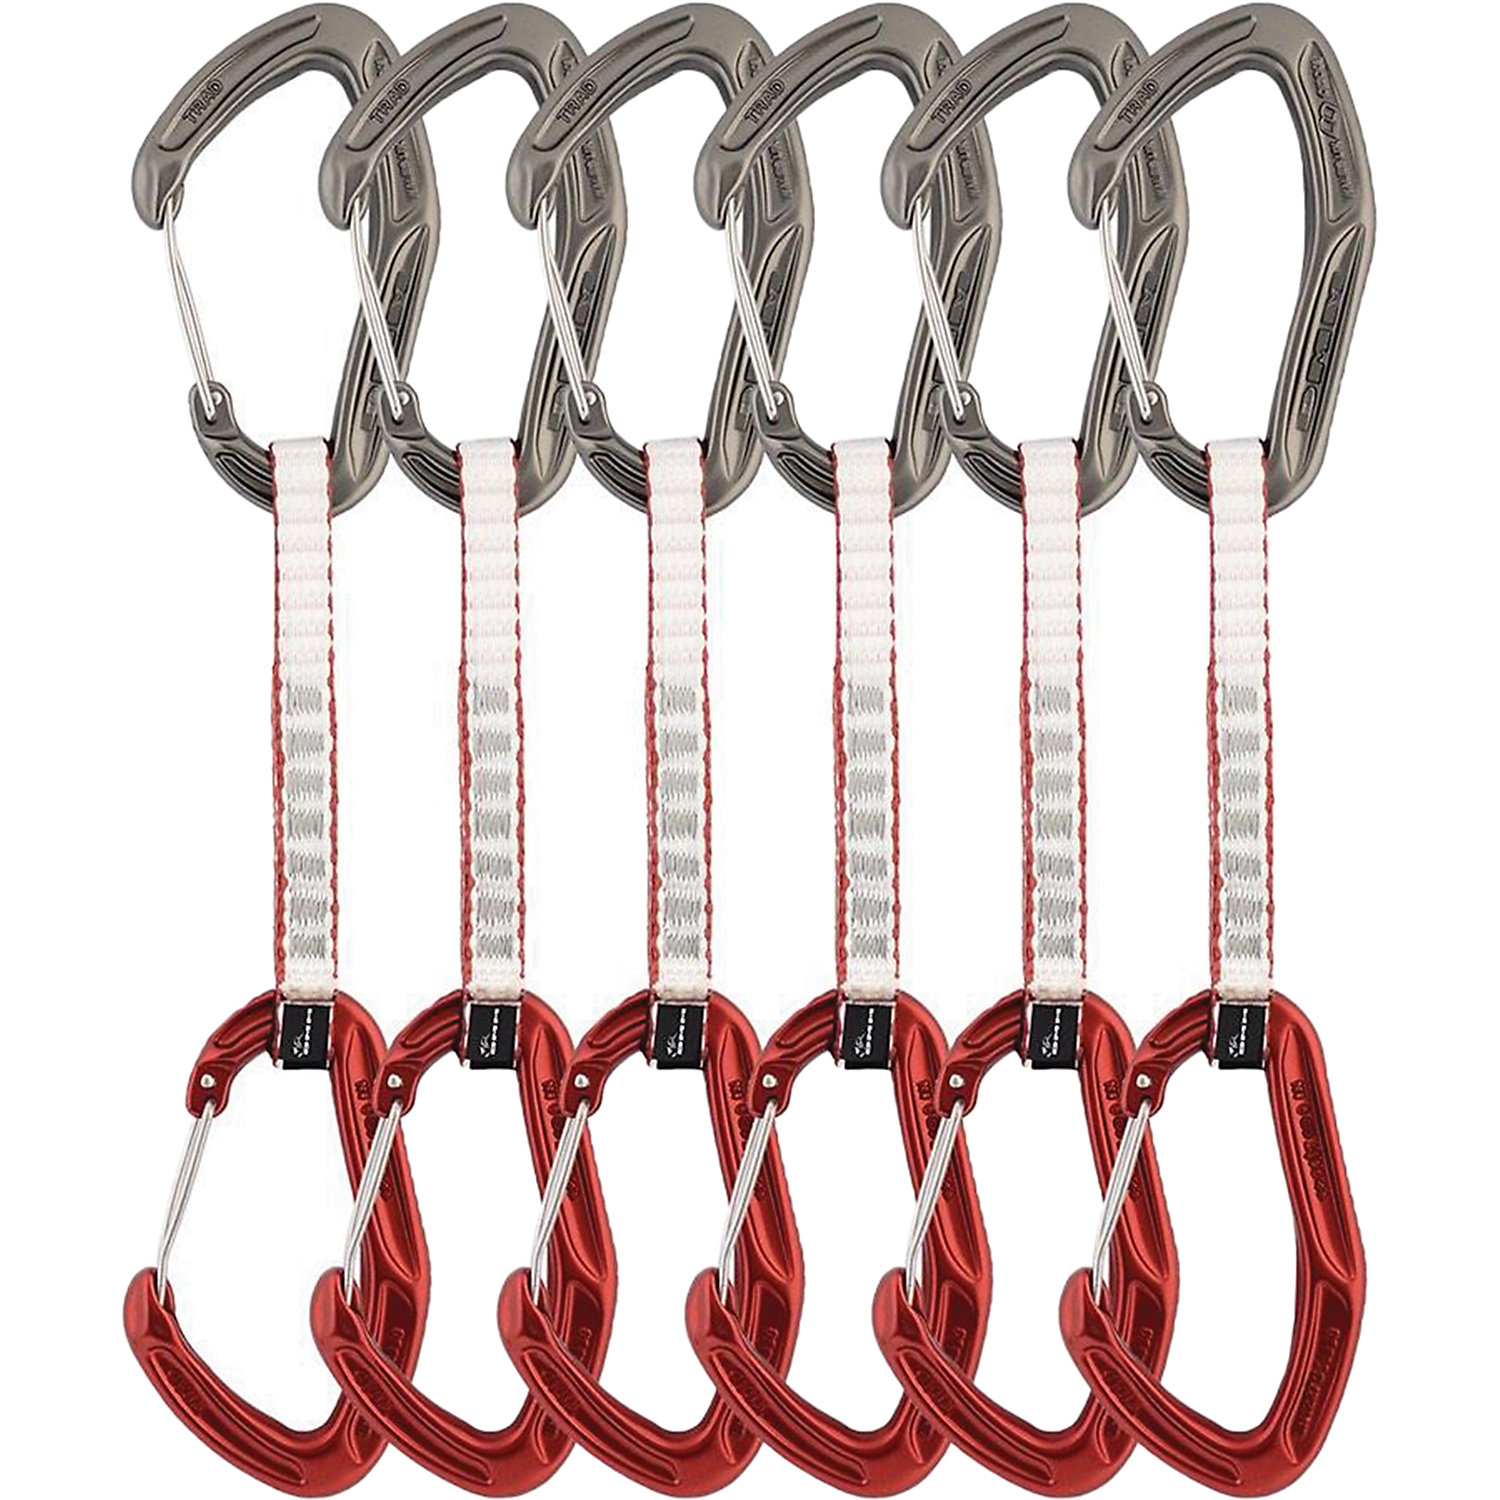 DMM Alpha Trad Quickdraw - 6 Pack